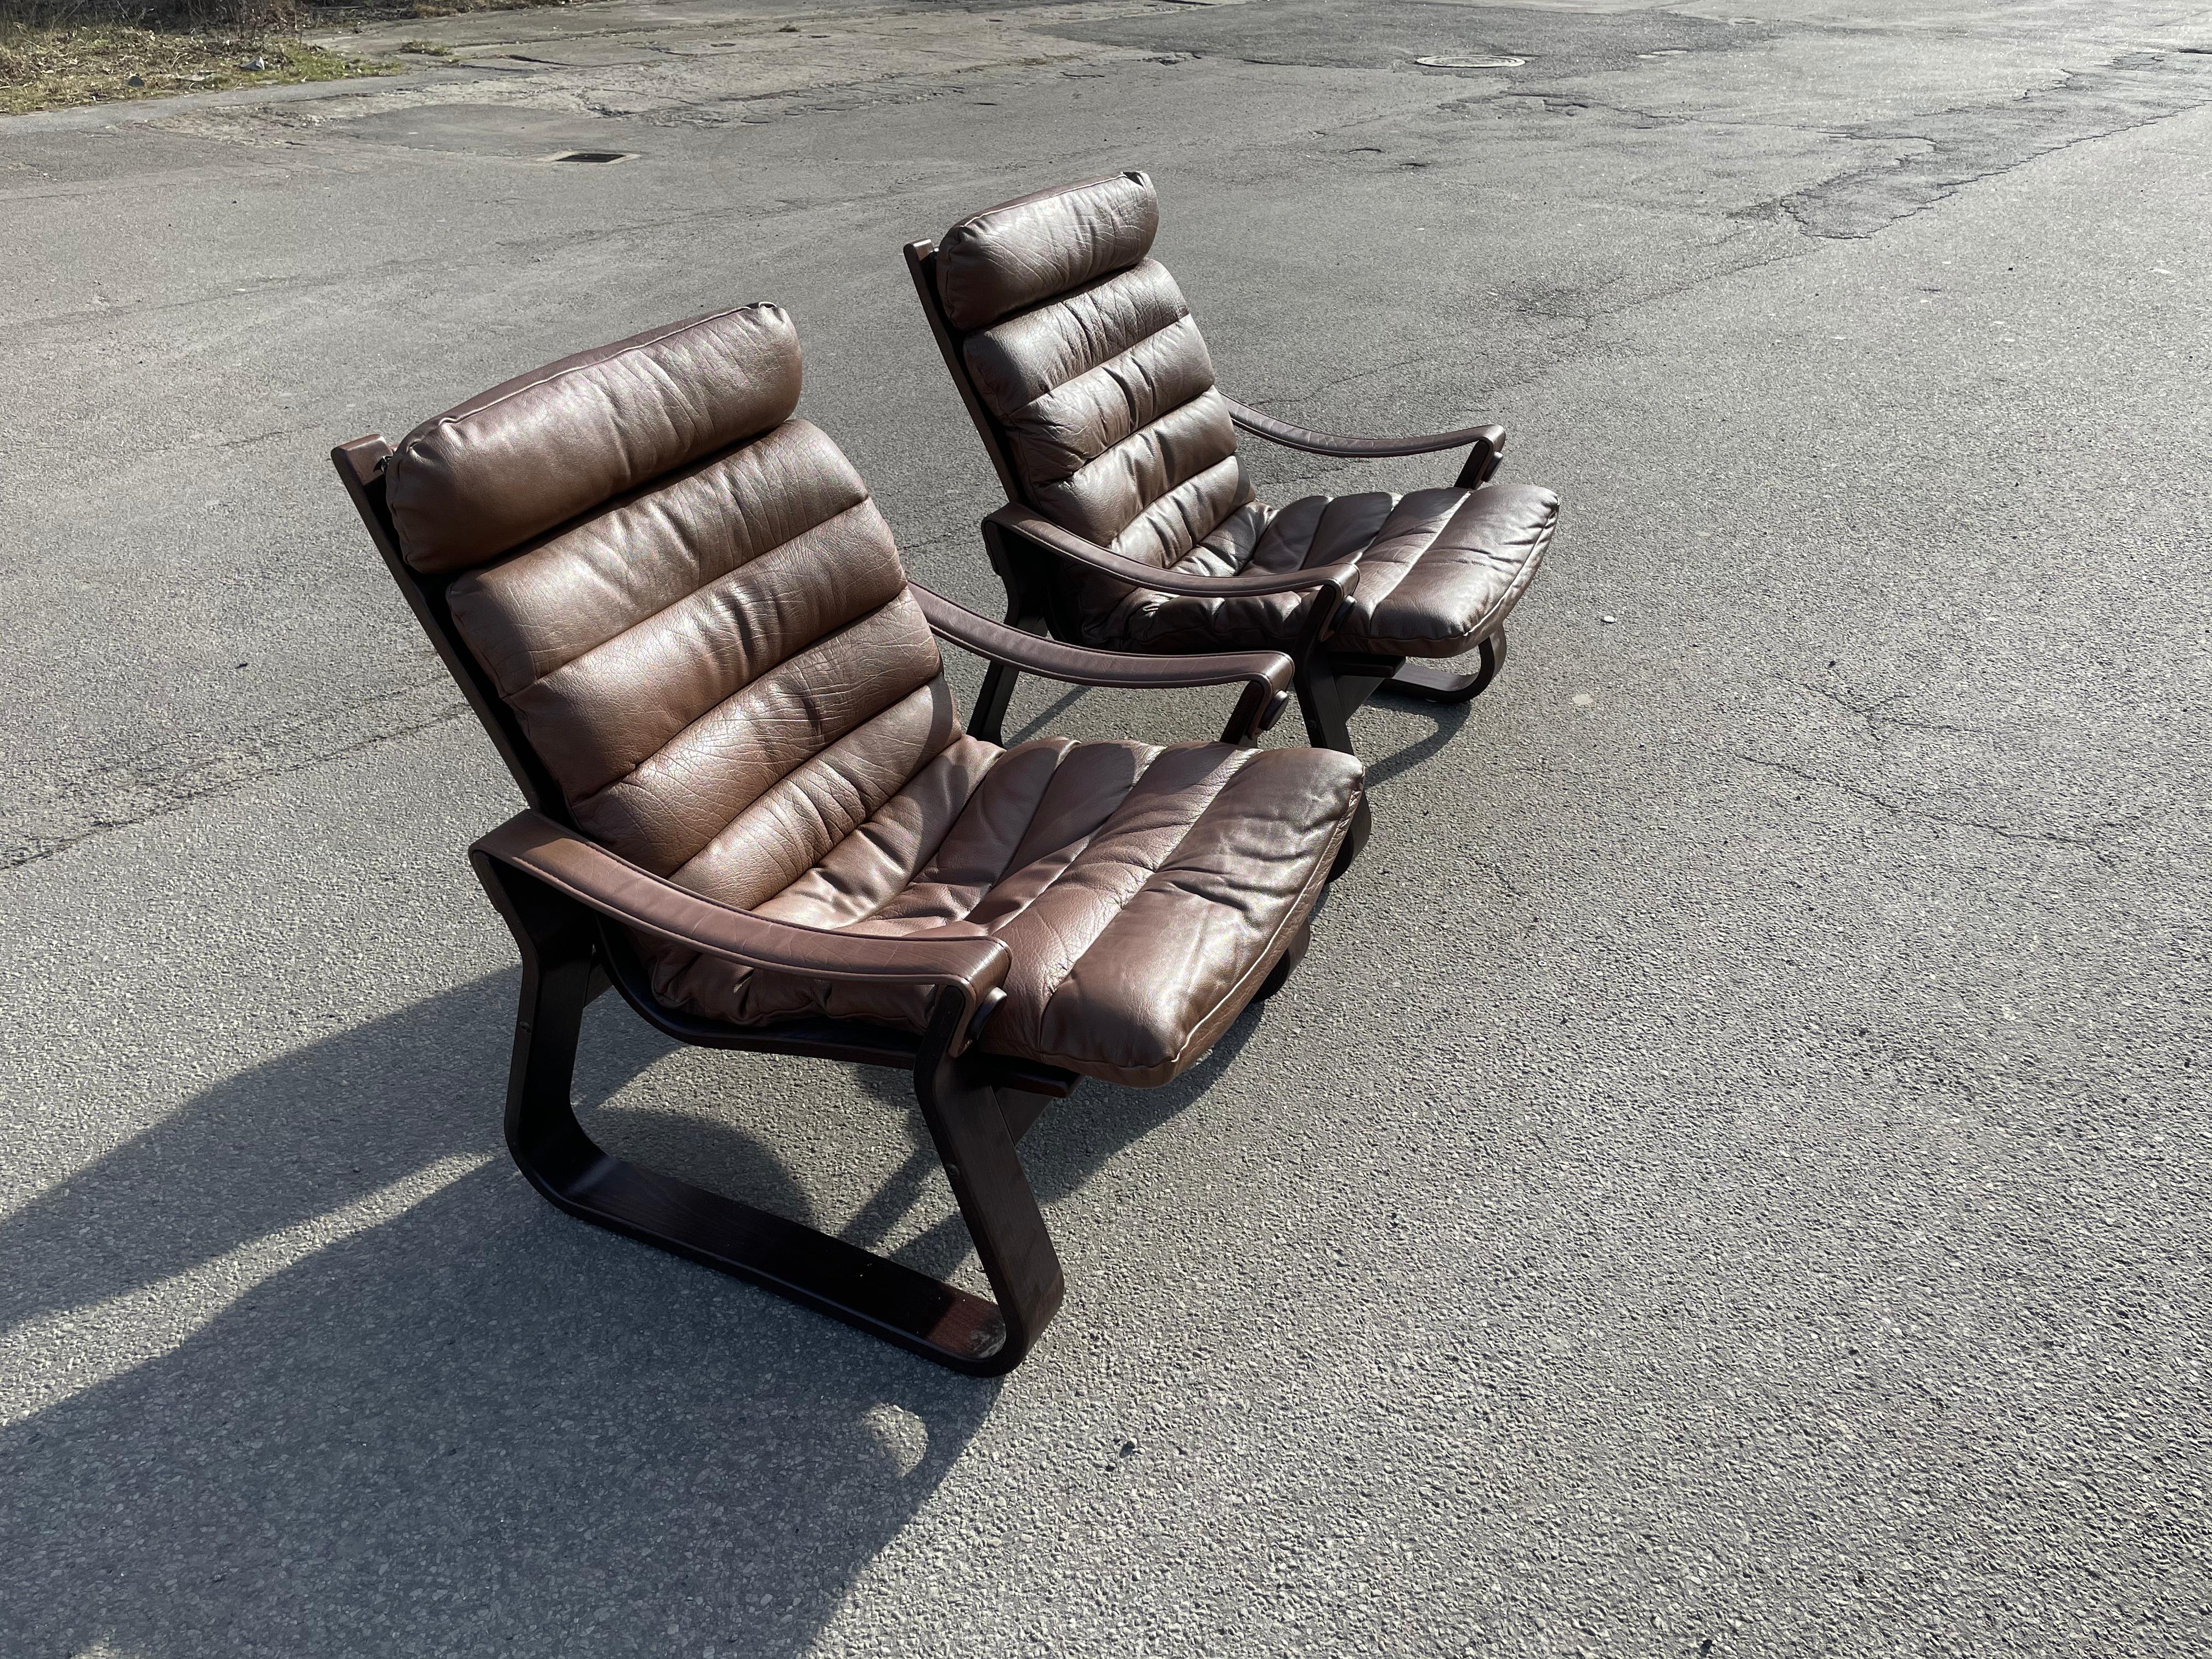 A set of Danish midcentury lounge chairs, comfortable with an option of adjusting seat position. A vintage in super condition.